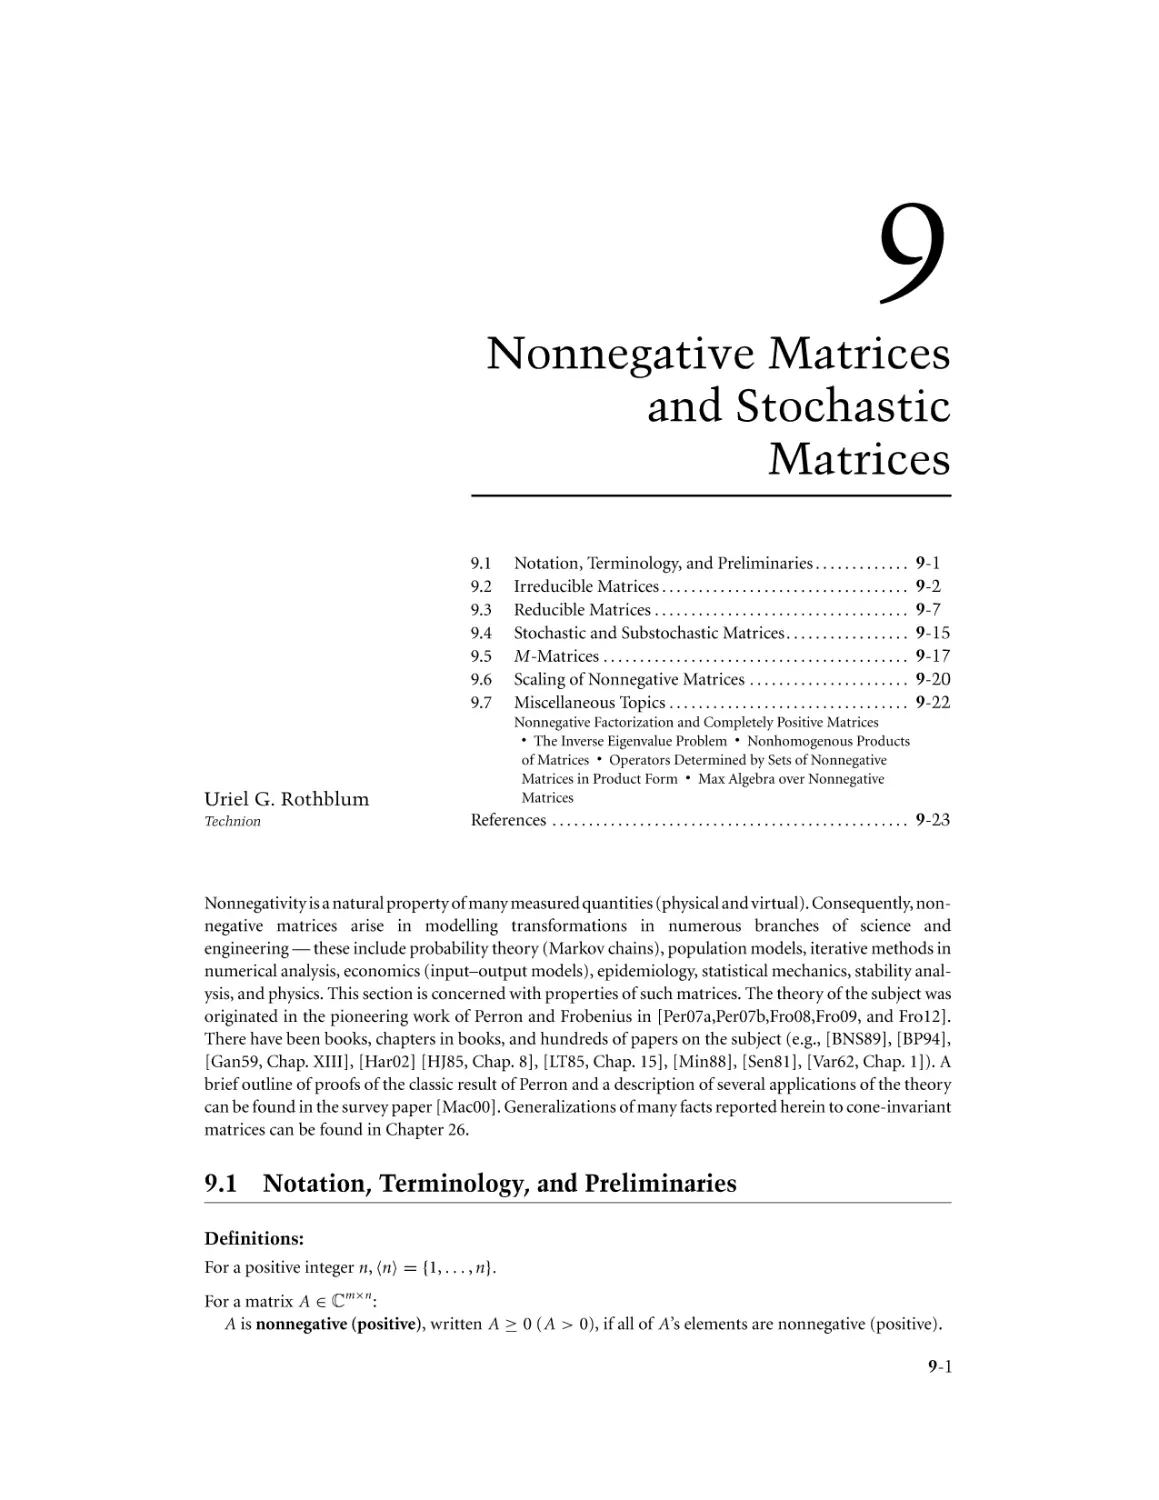 Chapter 9. Nonnegative Matrices and Stochastic Matrices